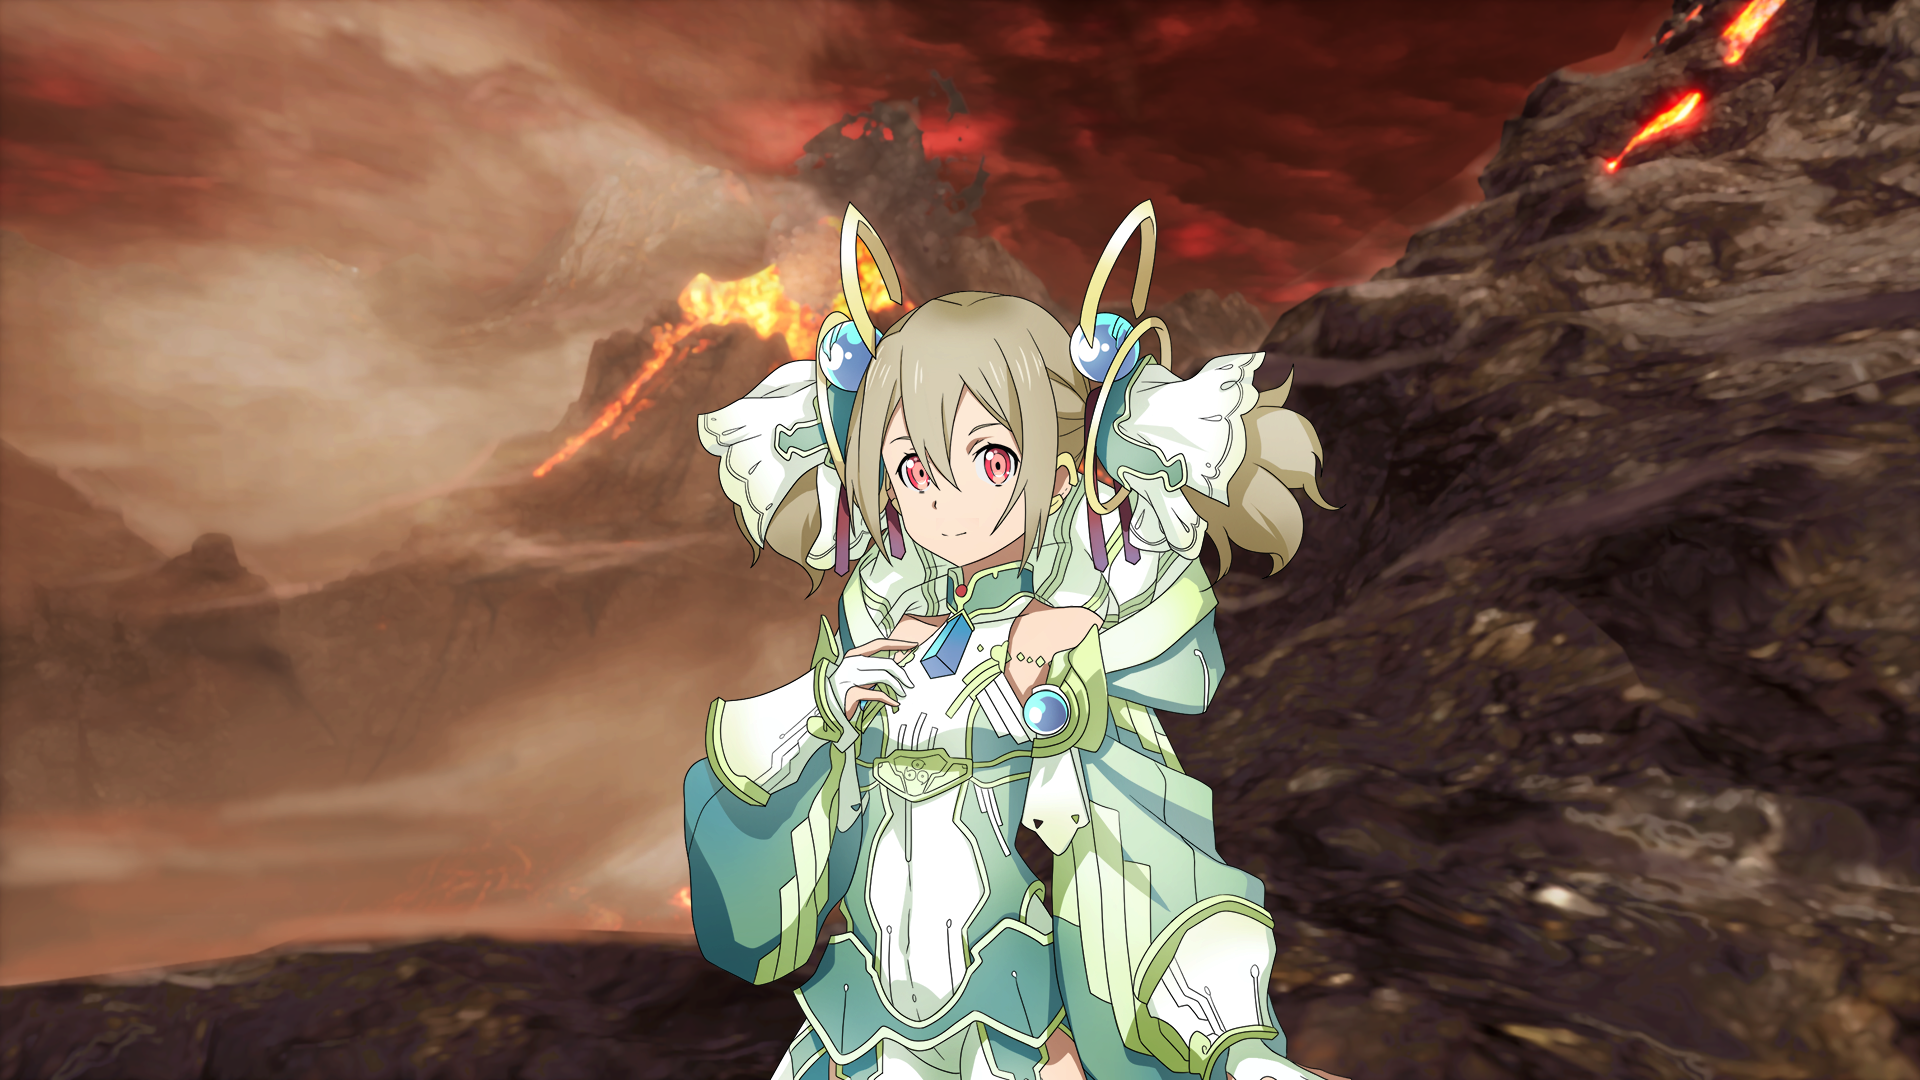 Sword Art Online Last Recollection Gets New Trailer & Gameplay as Lisbeth &  Silica Get Goddess Forms